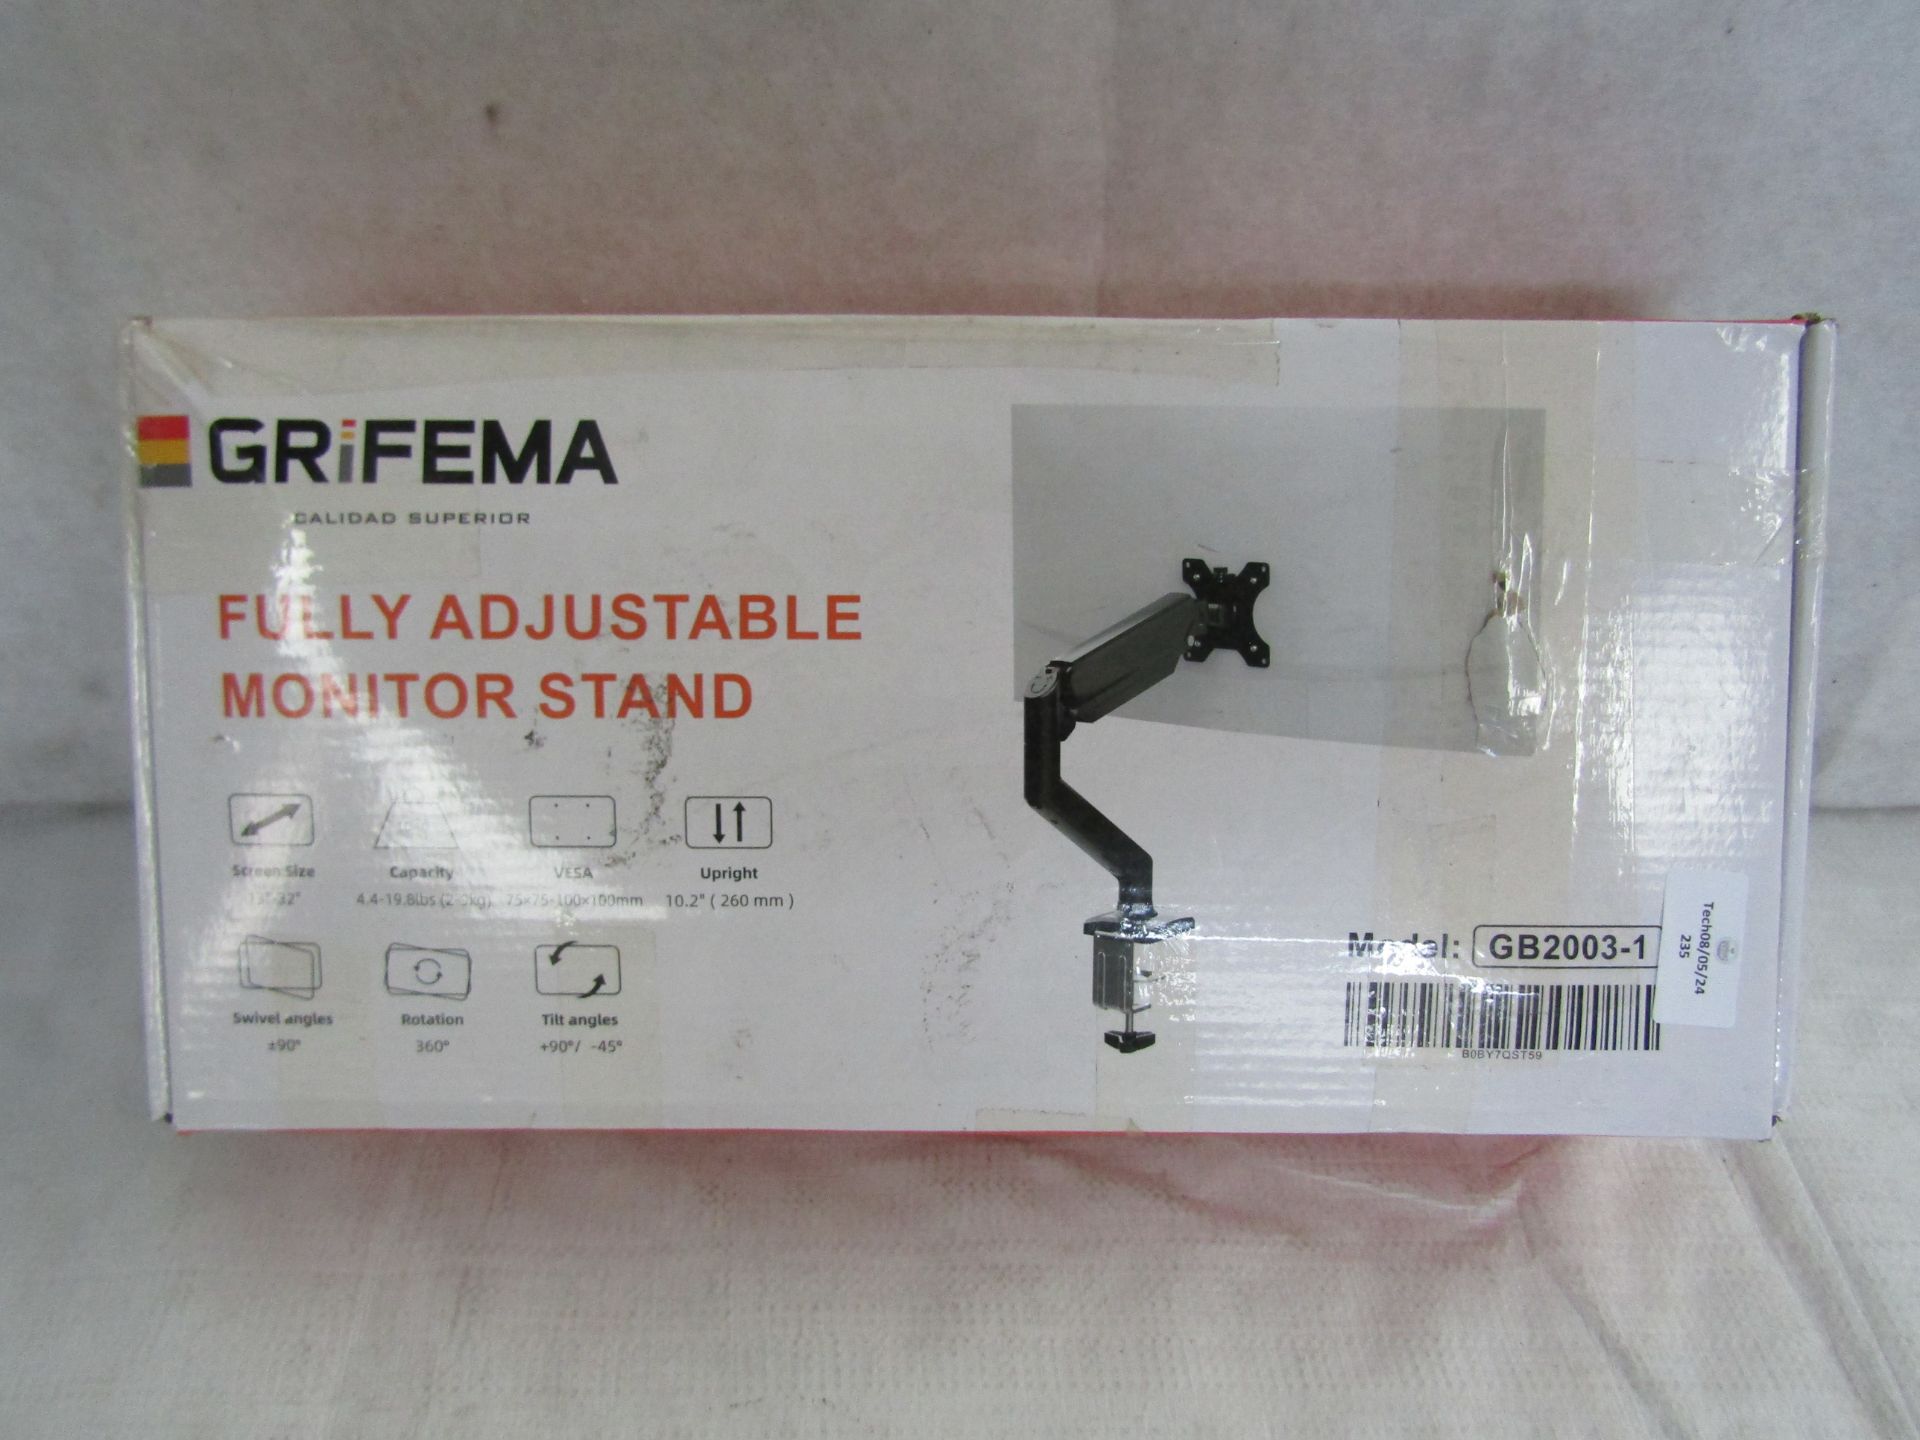 Grifema Fully Adjustable Monitor Stand, Unchecked & Boxed.